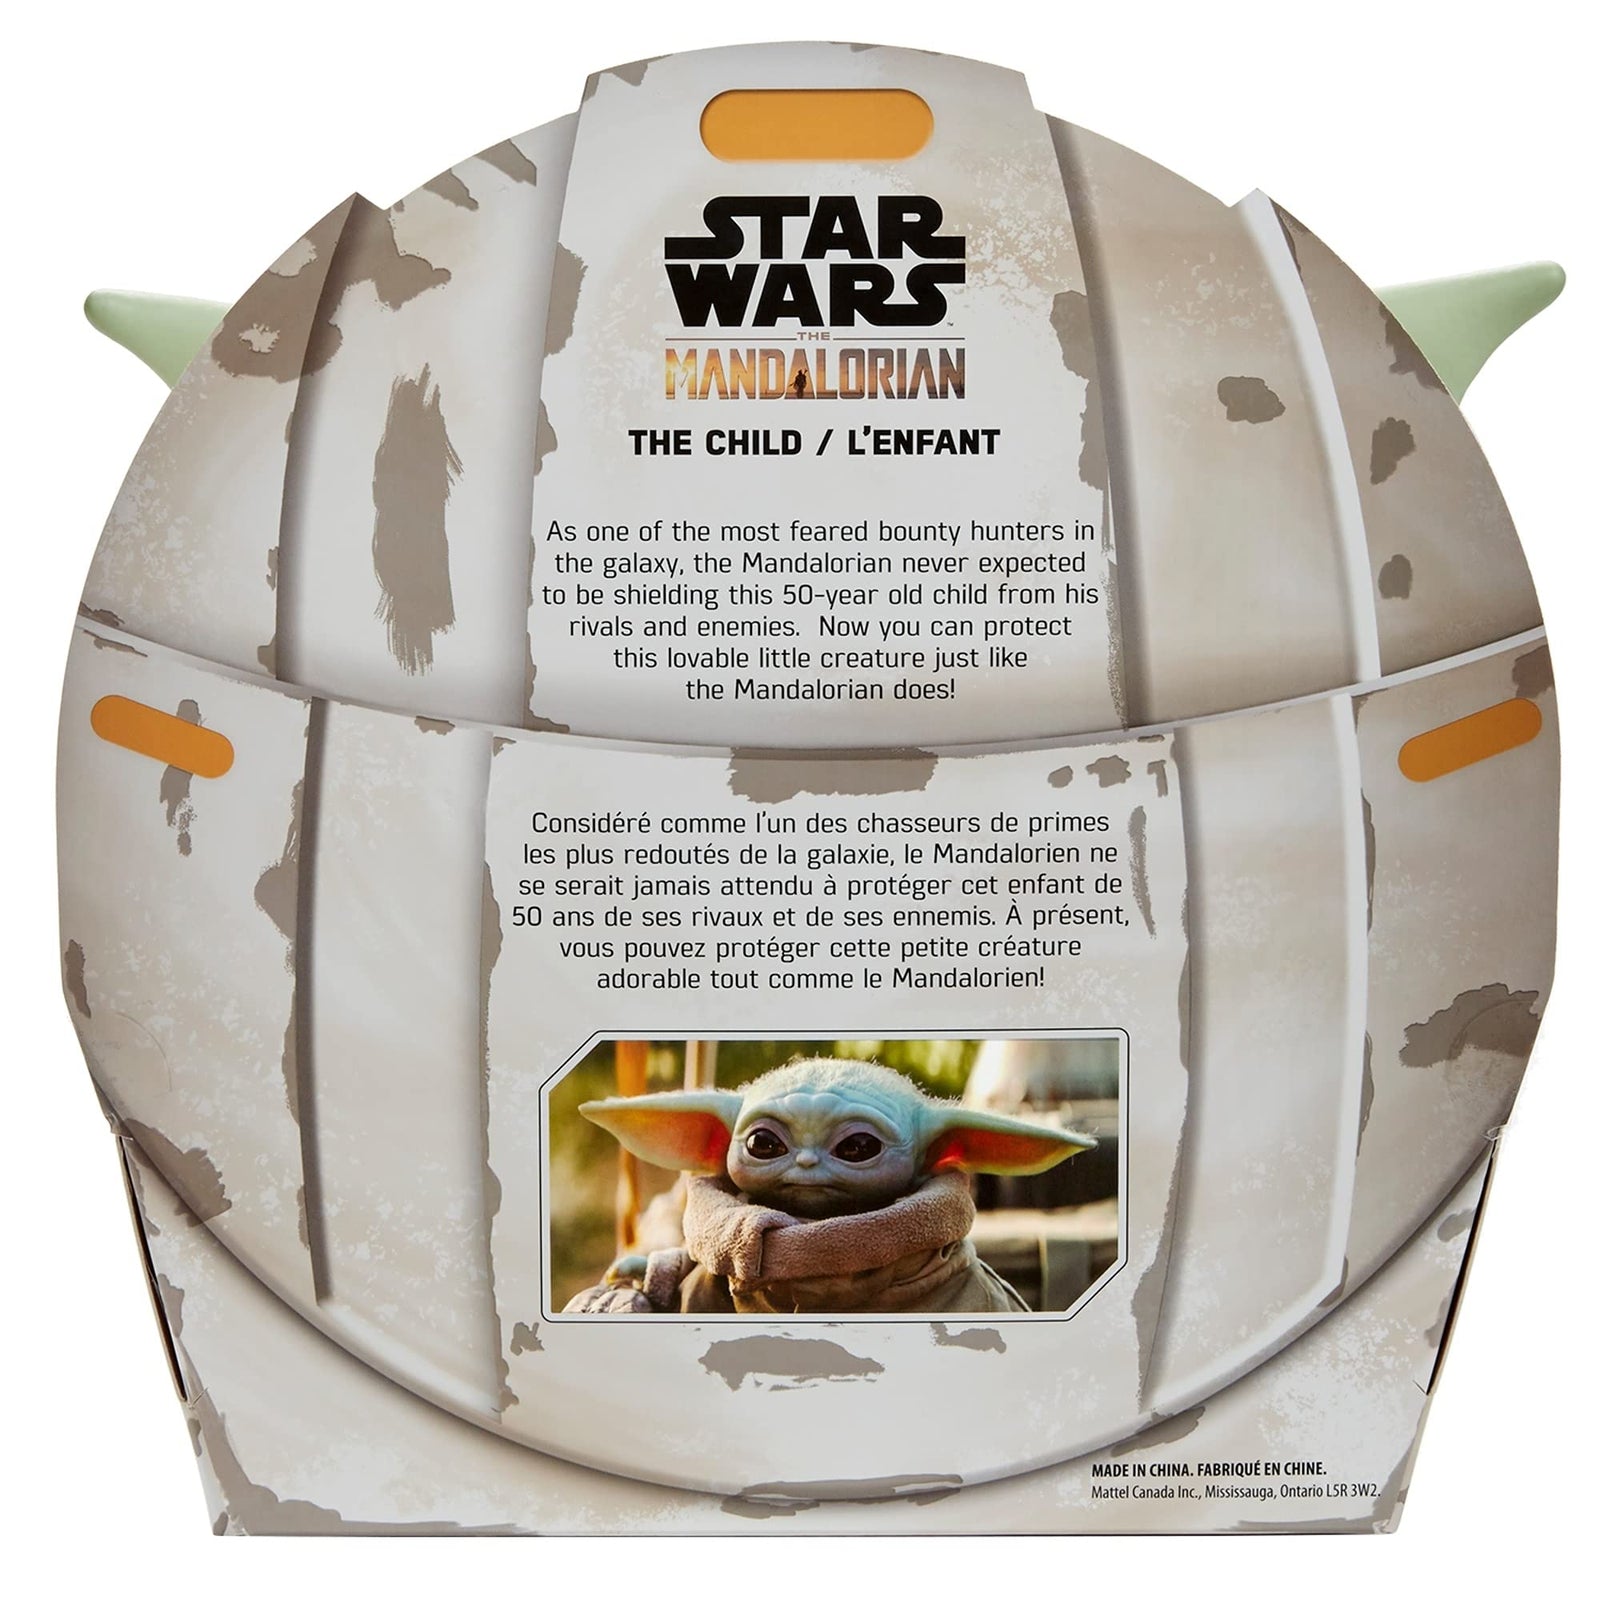 Star Wars Grogu Plush Toy, 11-in “The Child” from The Mandalorian, Collectible Stuffed Character for Movie Fans, Ages 3 Years and Older